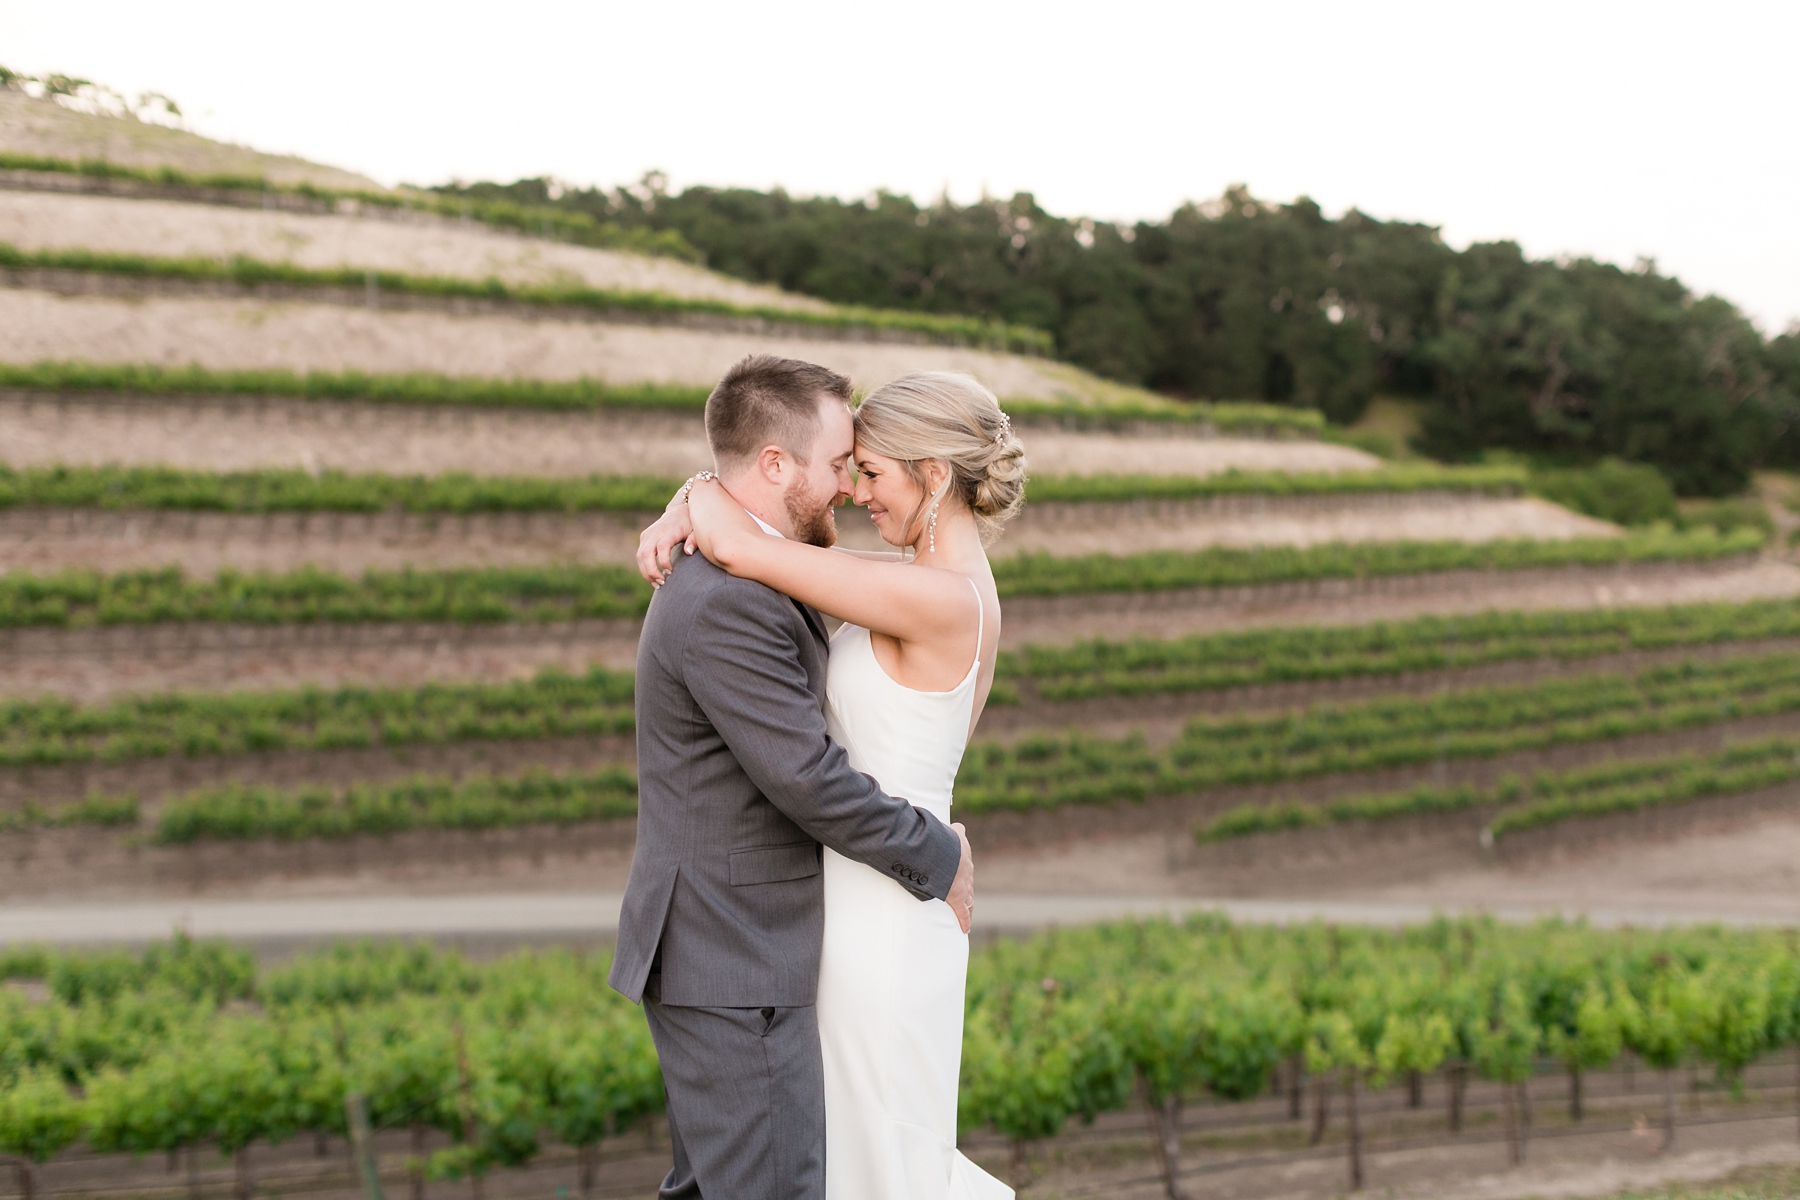 Bride and groom embrace and laugh in the vineyards at their foggy hilltop winery wedding in paso robles, california